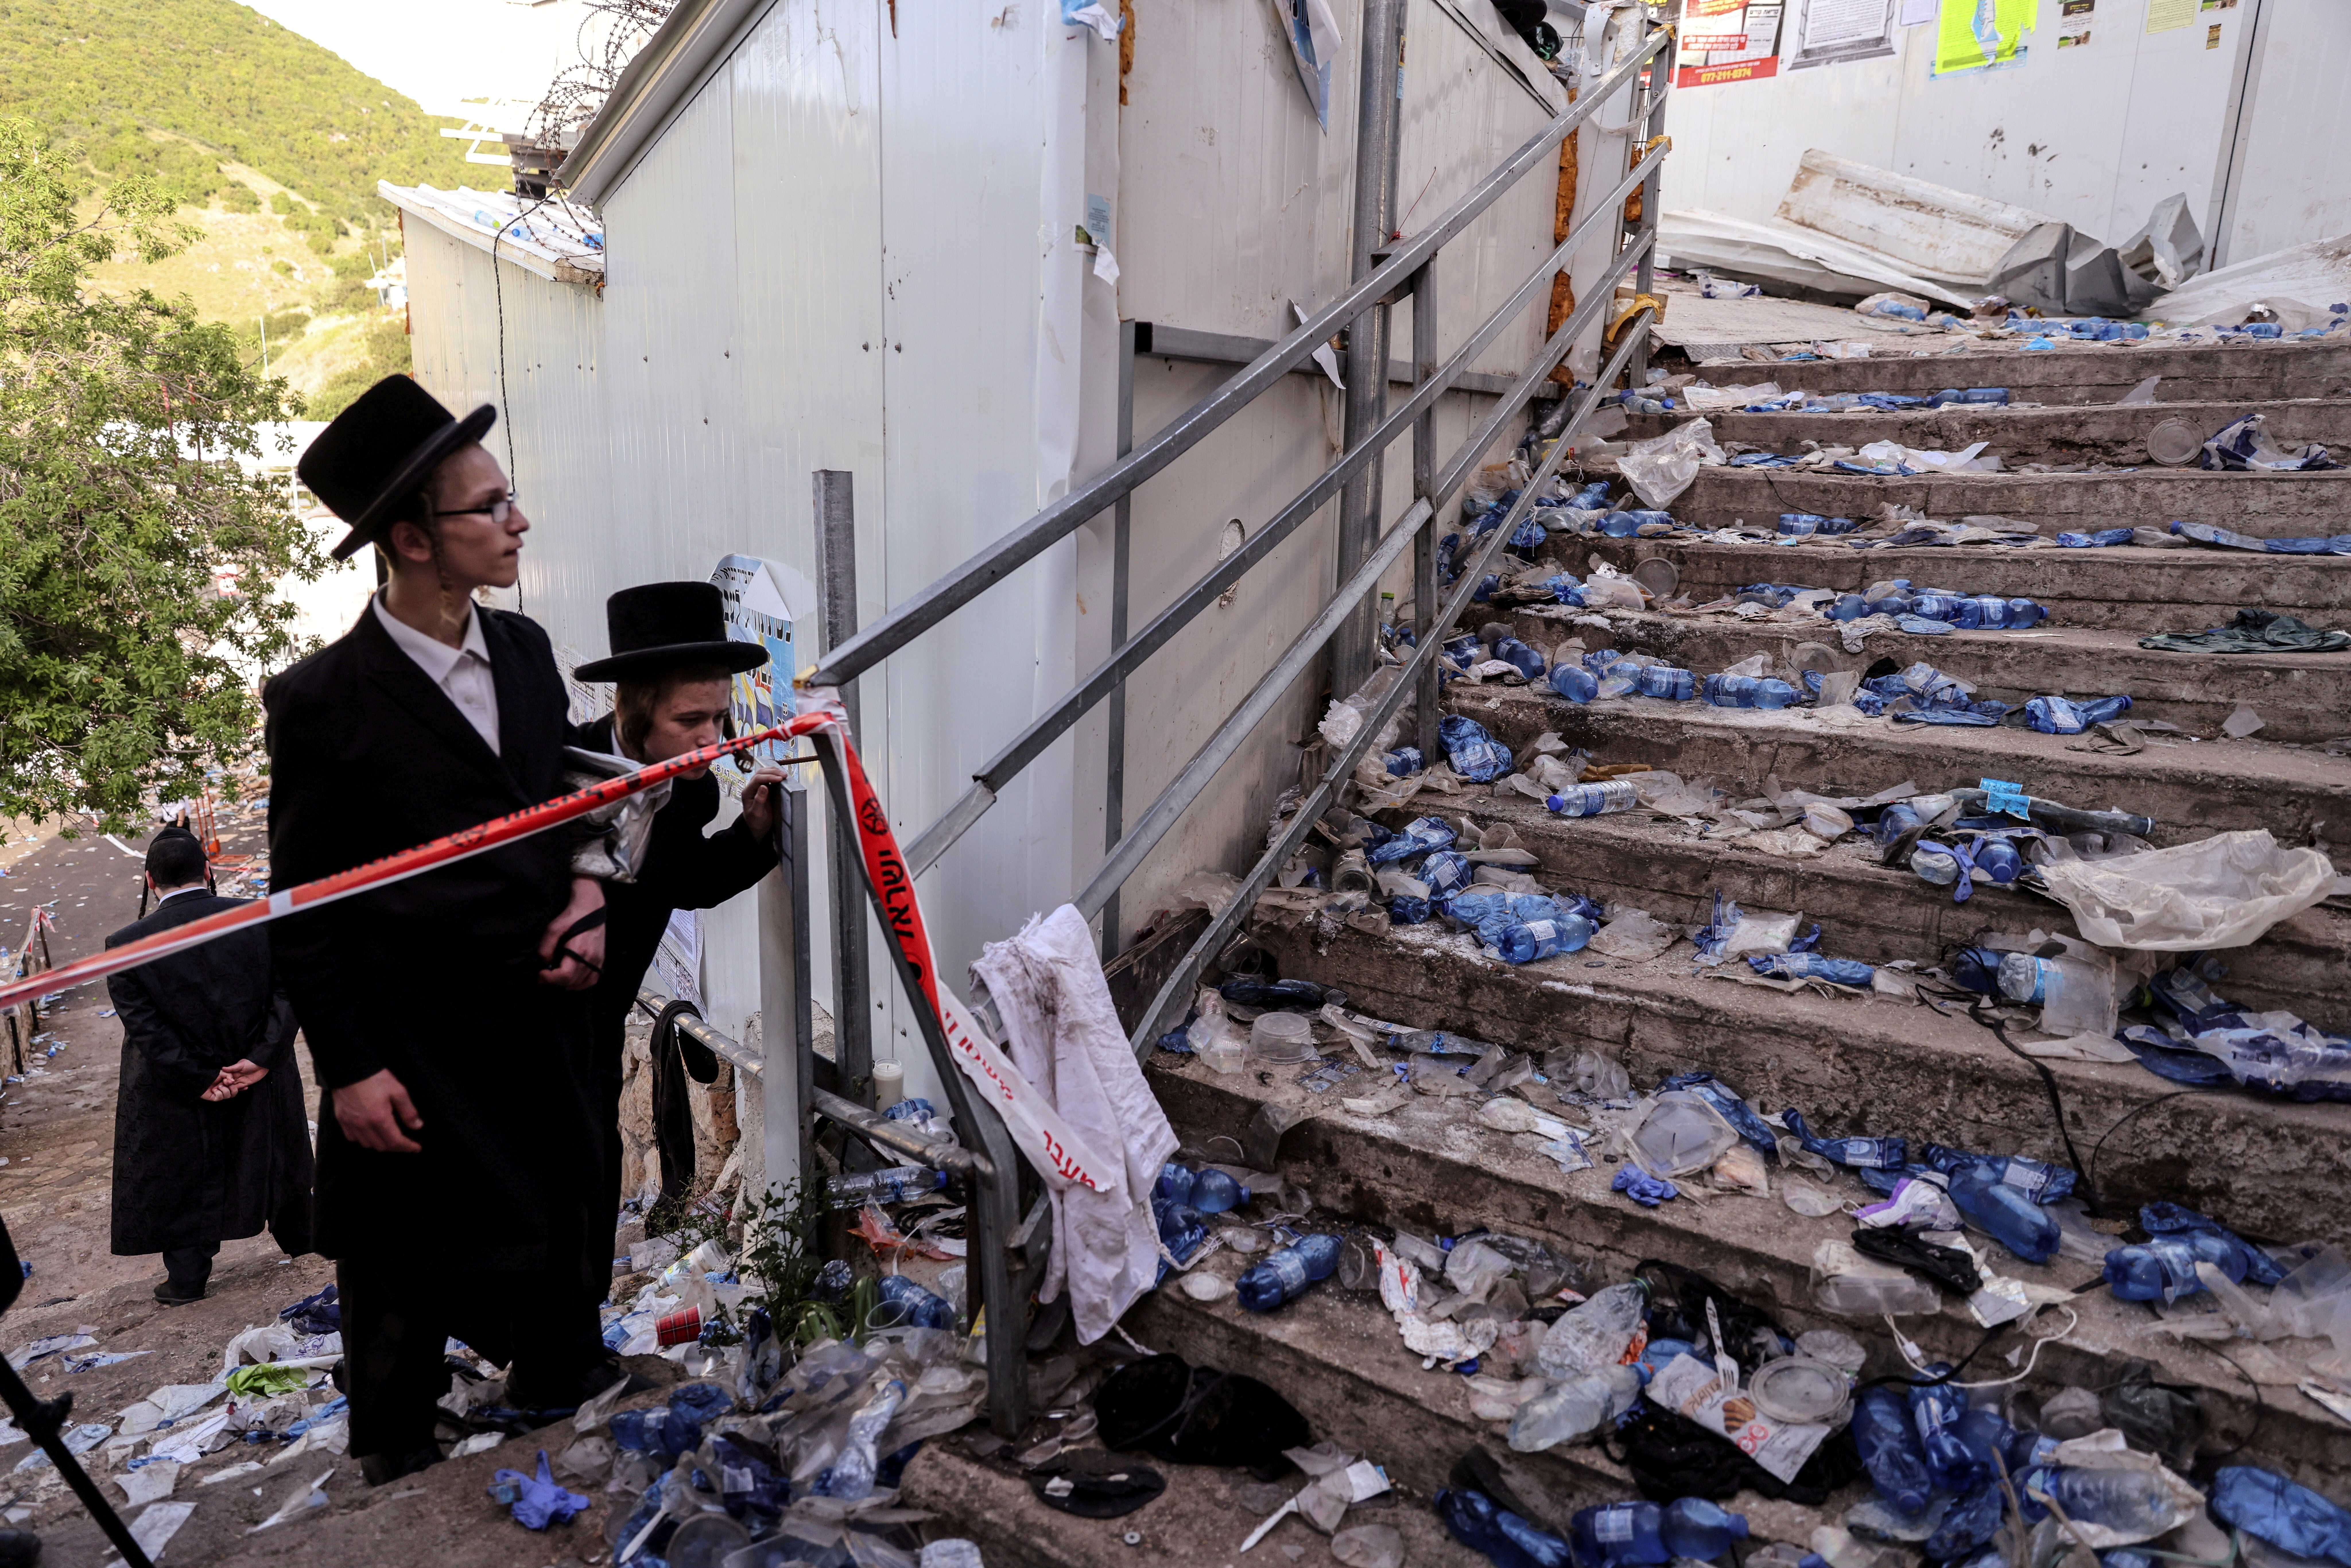 Ultra Orthodox Jews look at stairs with waste on them in Meron, Israel where 45 deaths were reported in April 2021 among thousands gathered at the tomb of a second-century sage for annual commemorations. Photo: Reuters